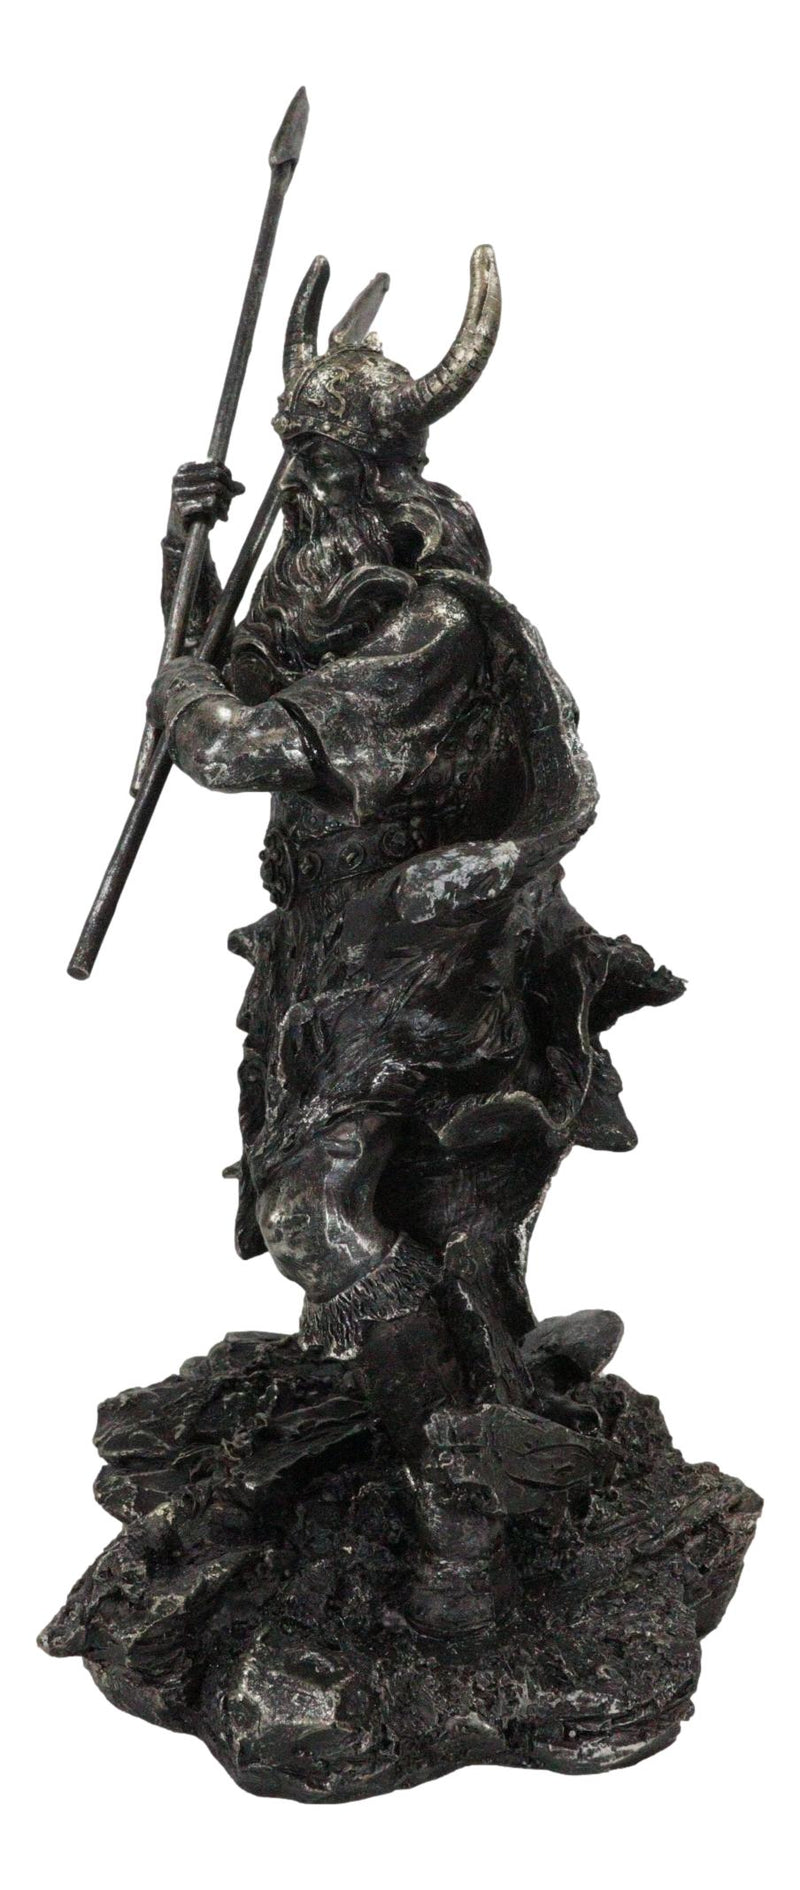 Viking Norse God Odin Alfather With Horned Helm Holding Javelin Spears Figurine